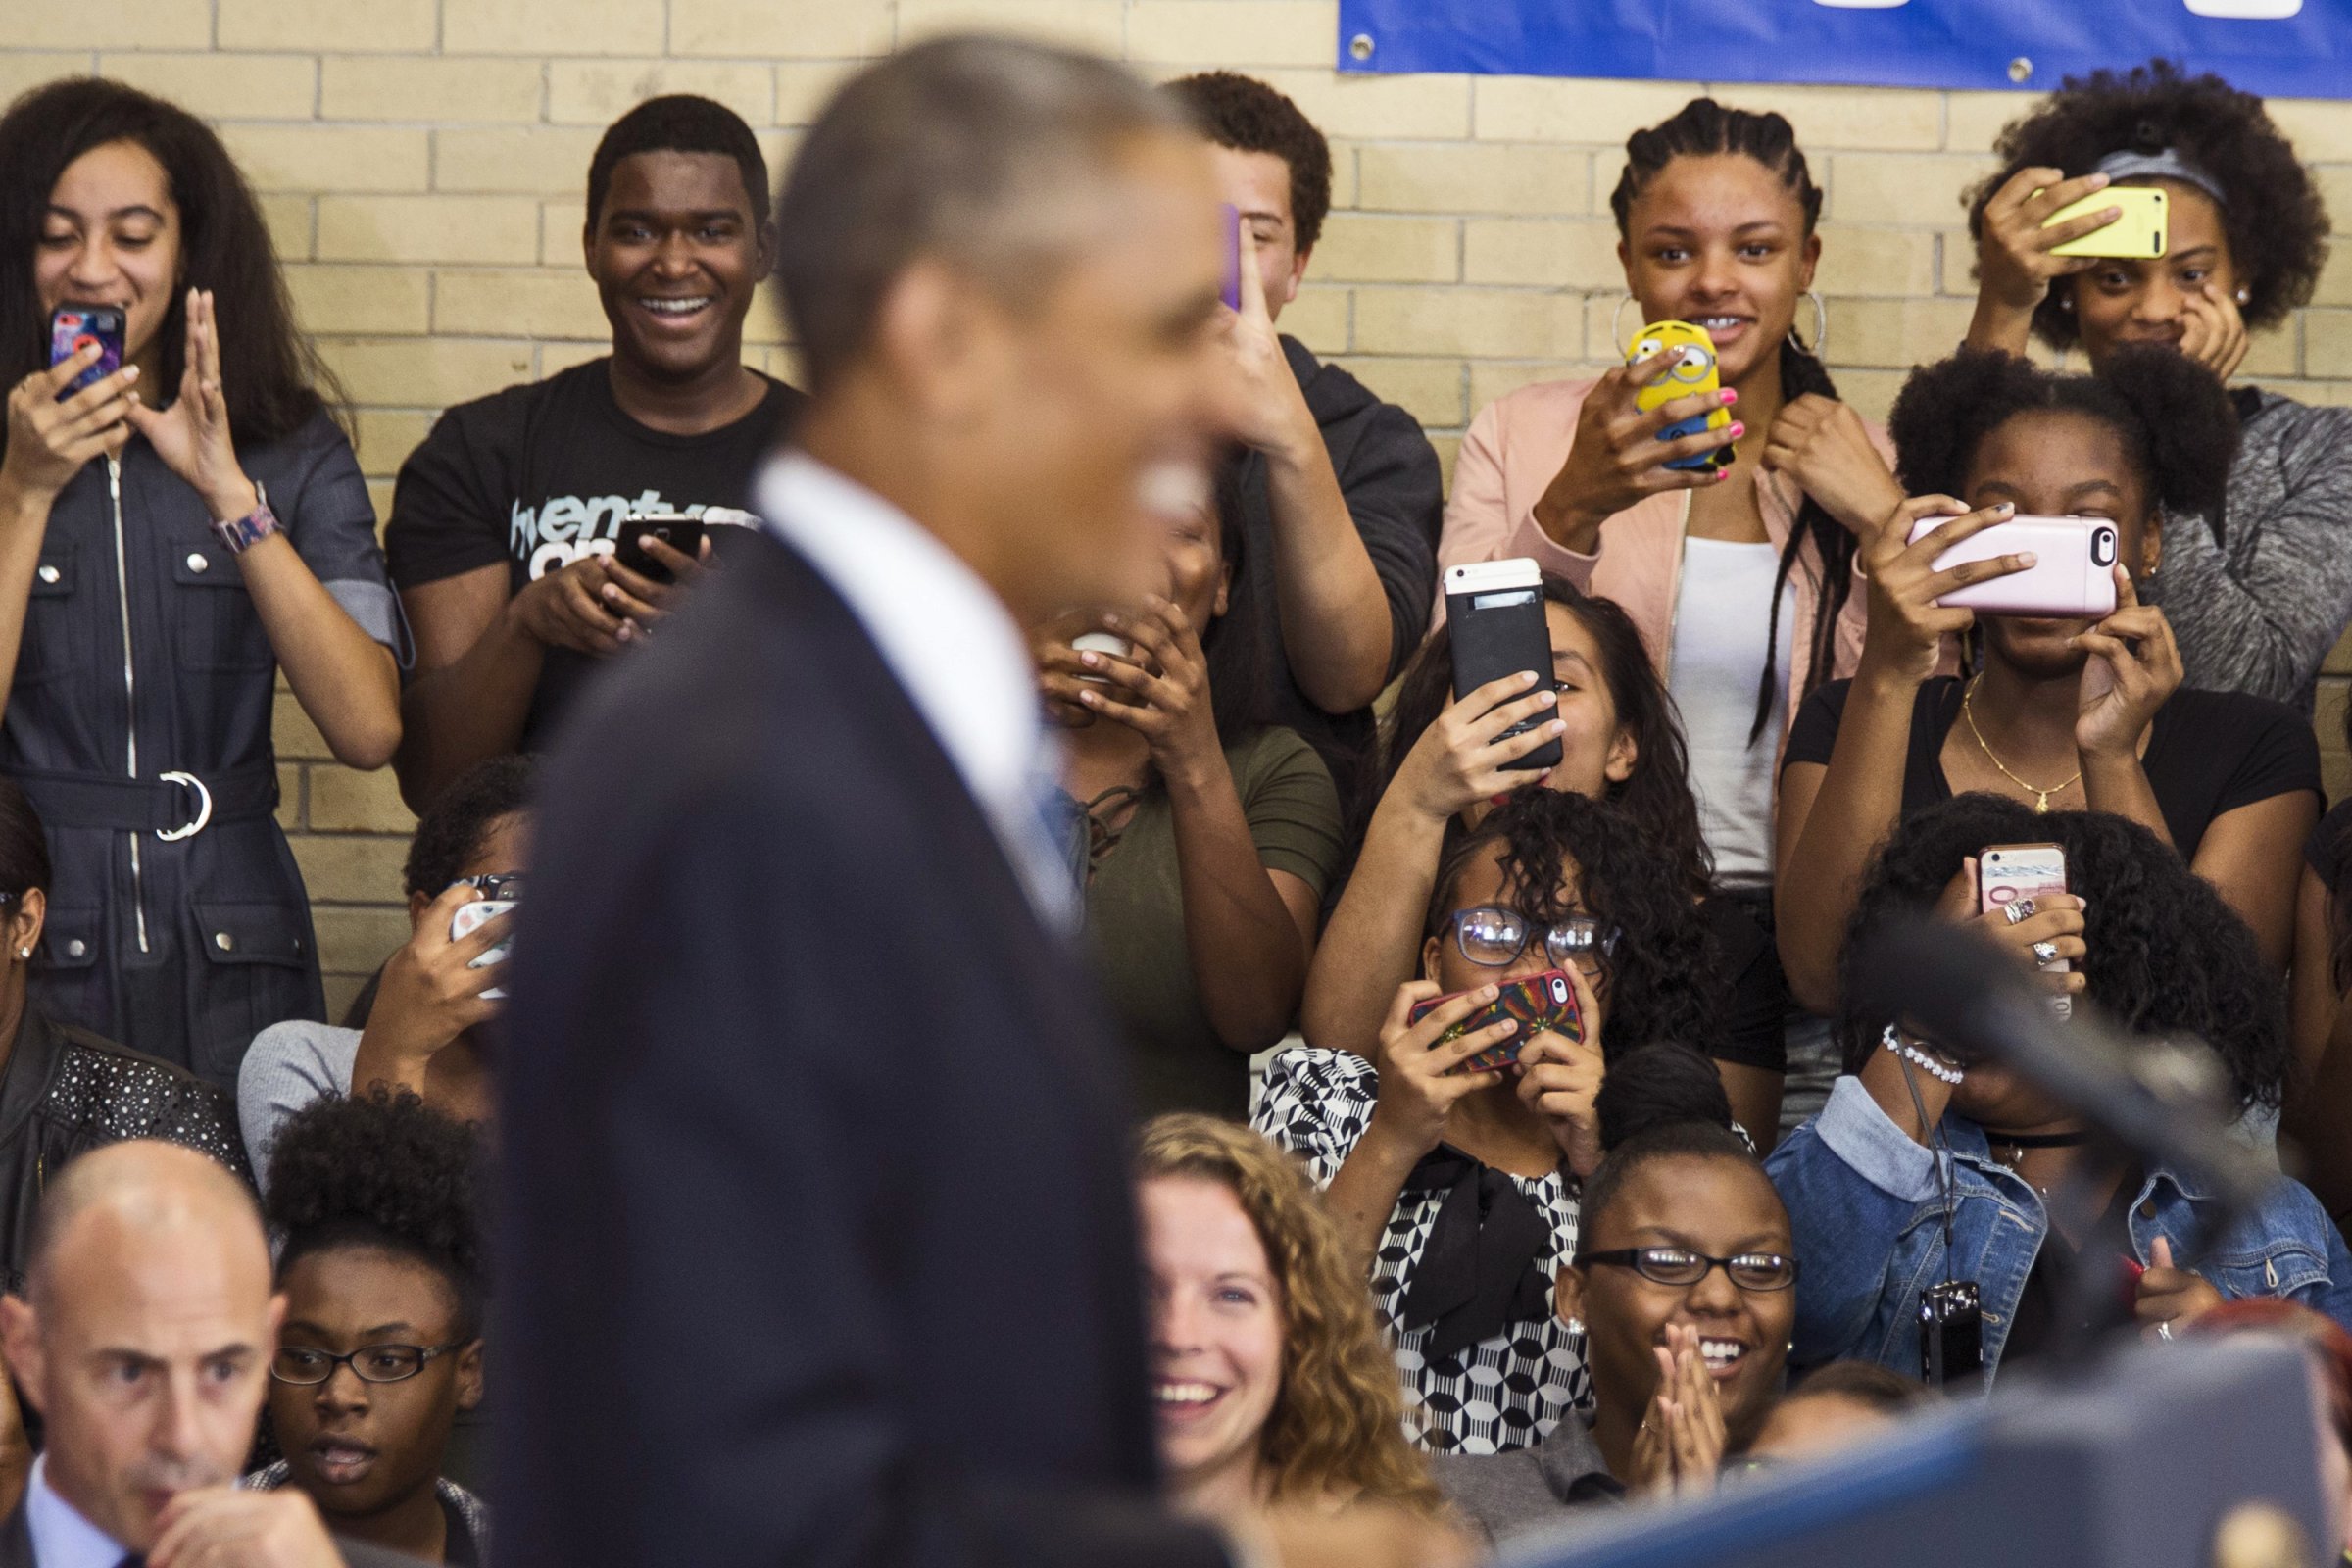 Obama smiles as students take photos on their cell phones during a speech at Benjamin Banneker Academy High School in Washington, on Oct. 17, 2016.